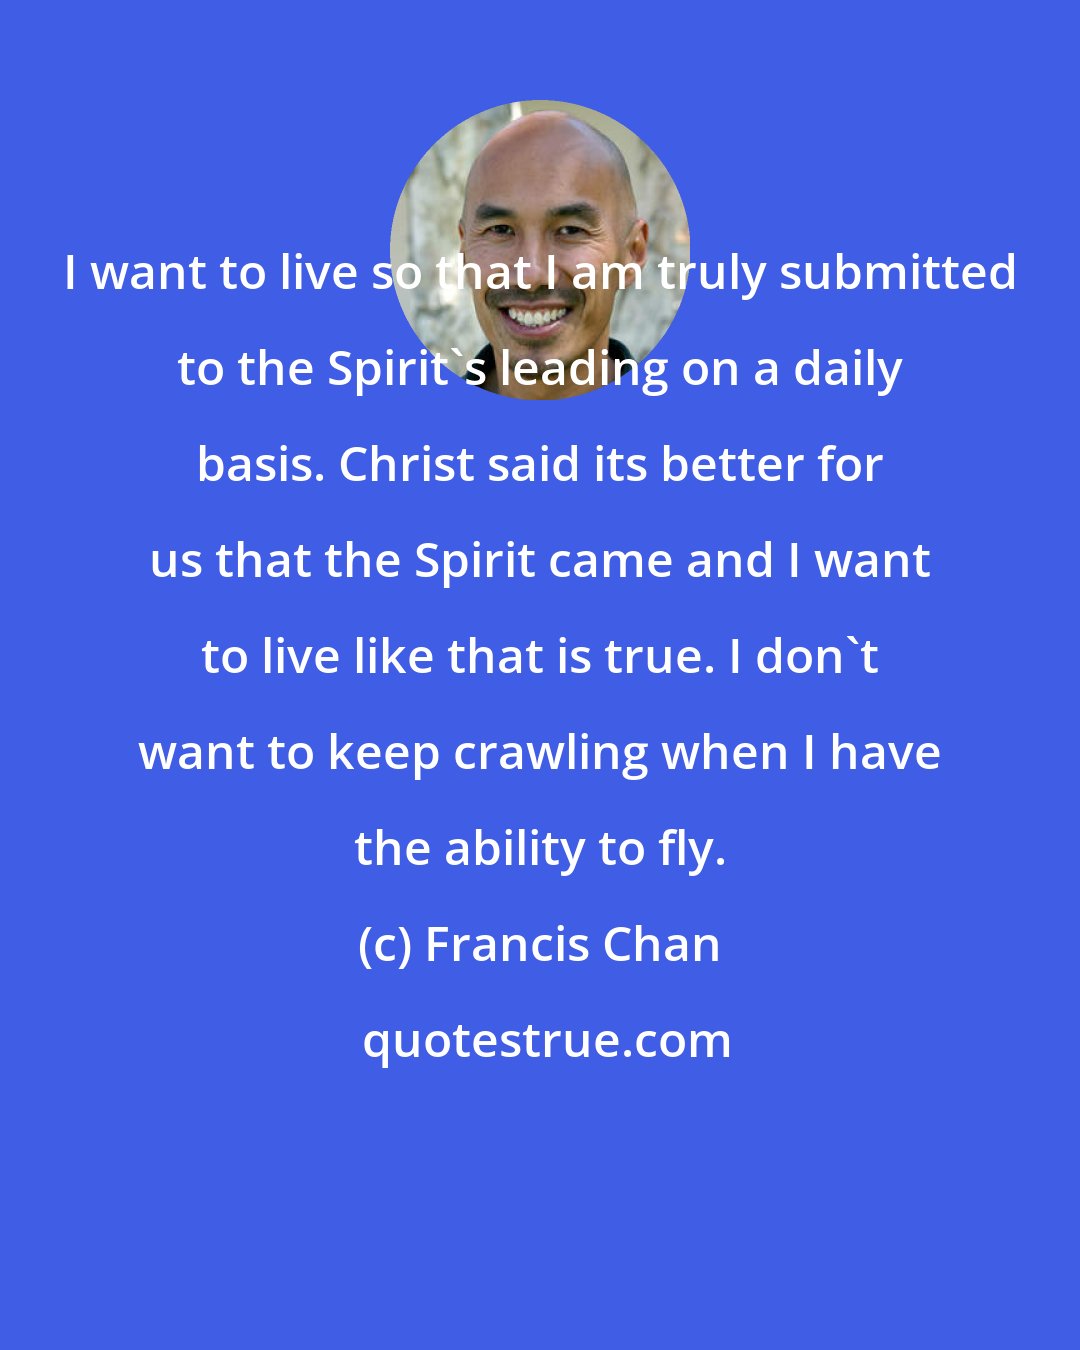 Francis Chan: I want to live so that I am truly submitted to the Spirit's leading on a daily basis. Christ said its better for us that the Spirit came and I want to live like that is true. I don't want to keep crawling when I have the ability to fly.